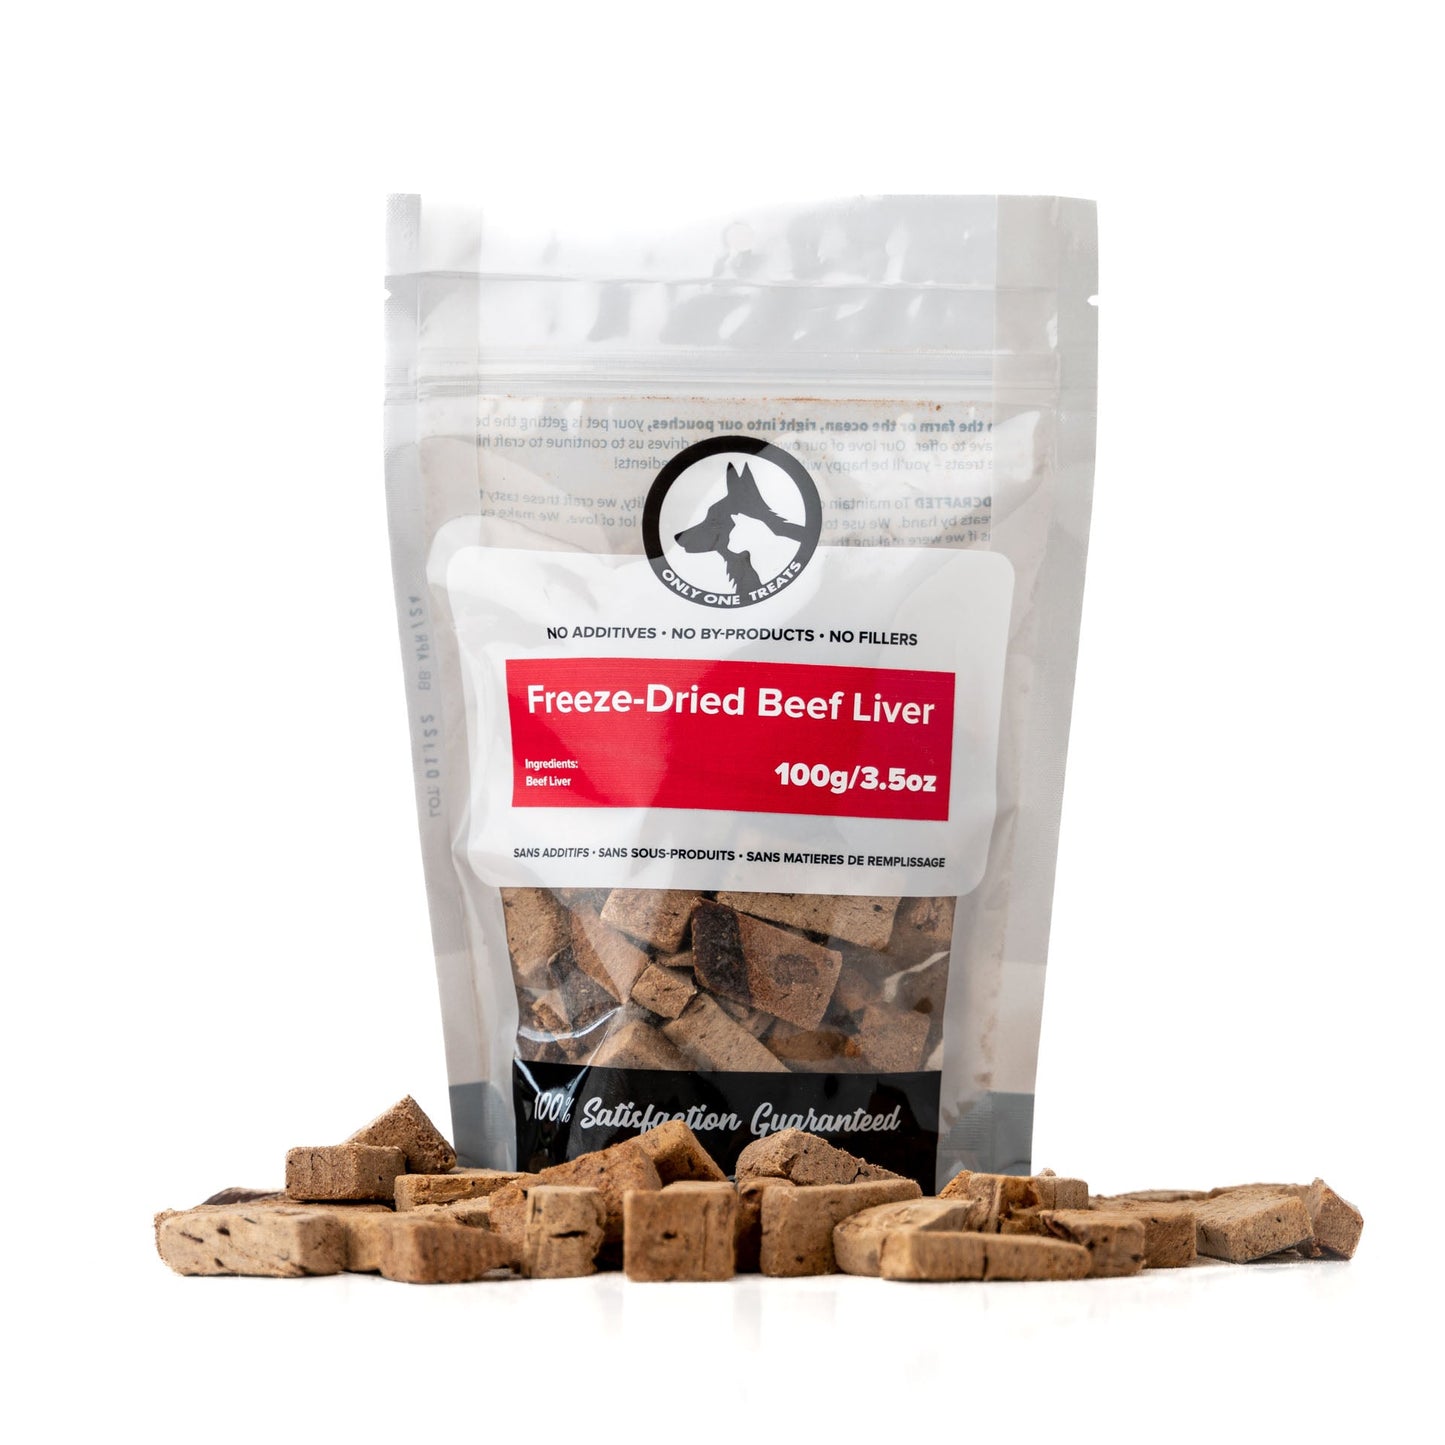 Freeze-Dried Beef Liver 100g - Only One Treats